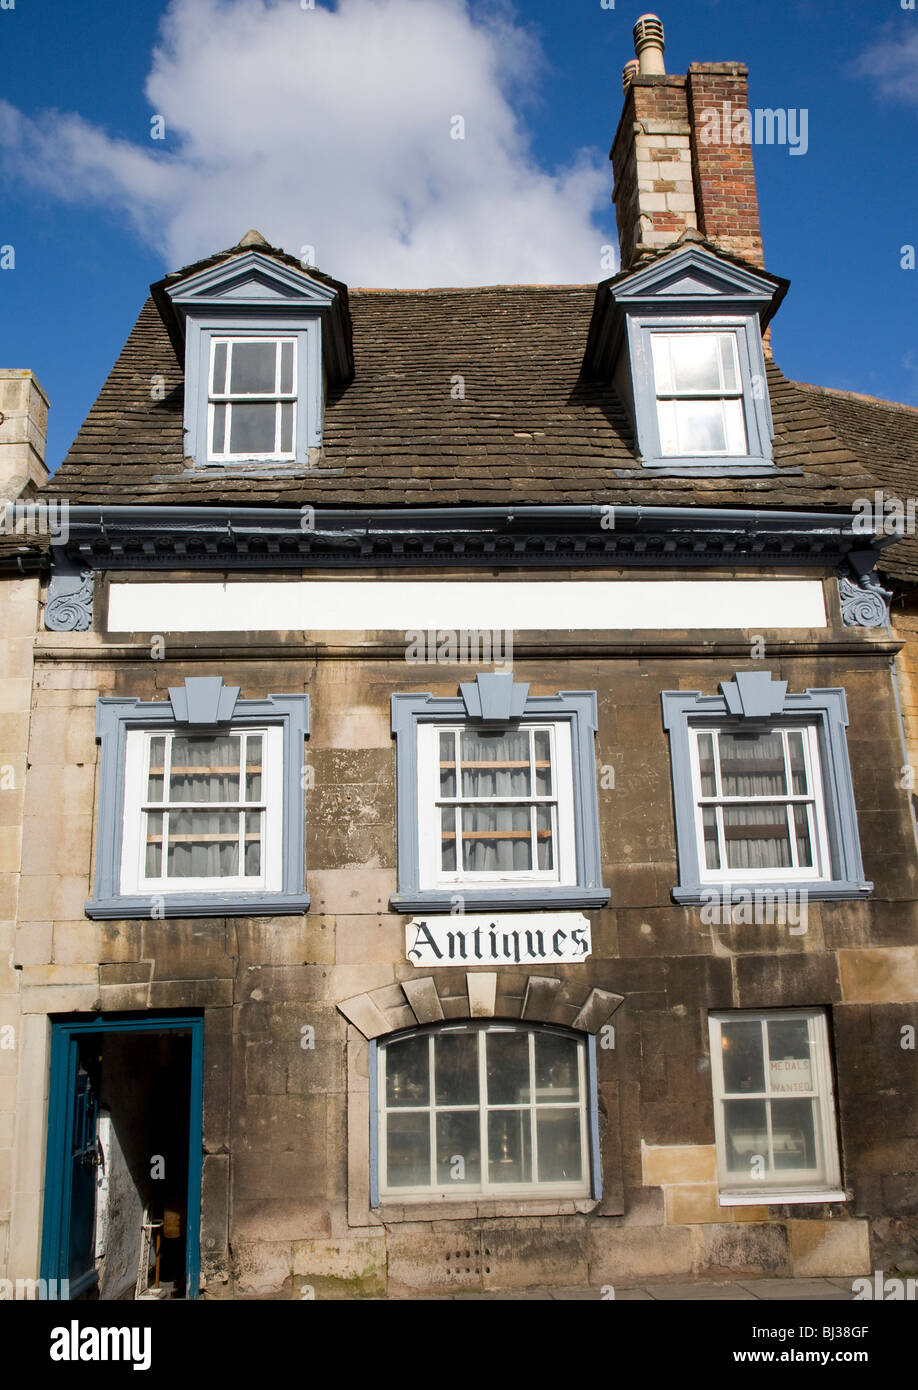 Antiques shop in Stamford, Lincs Stock Photo